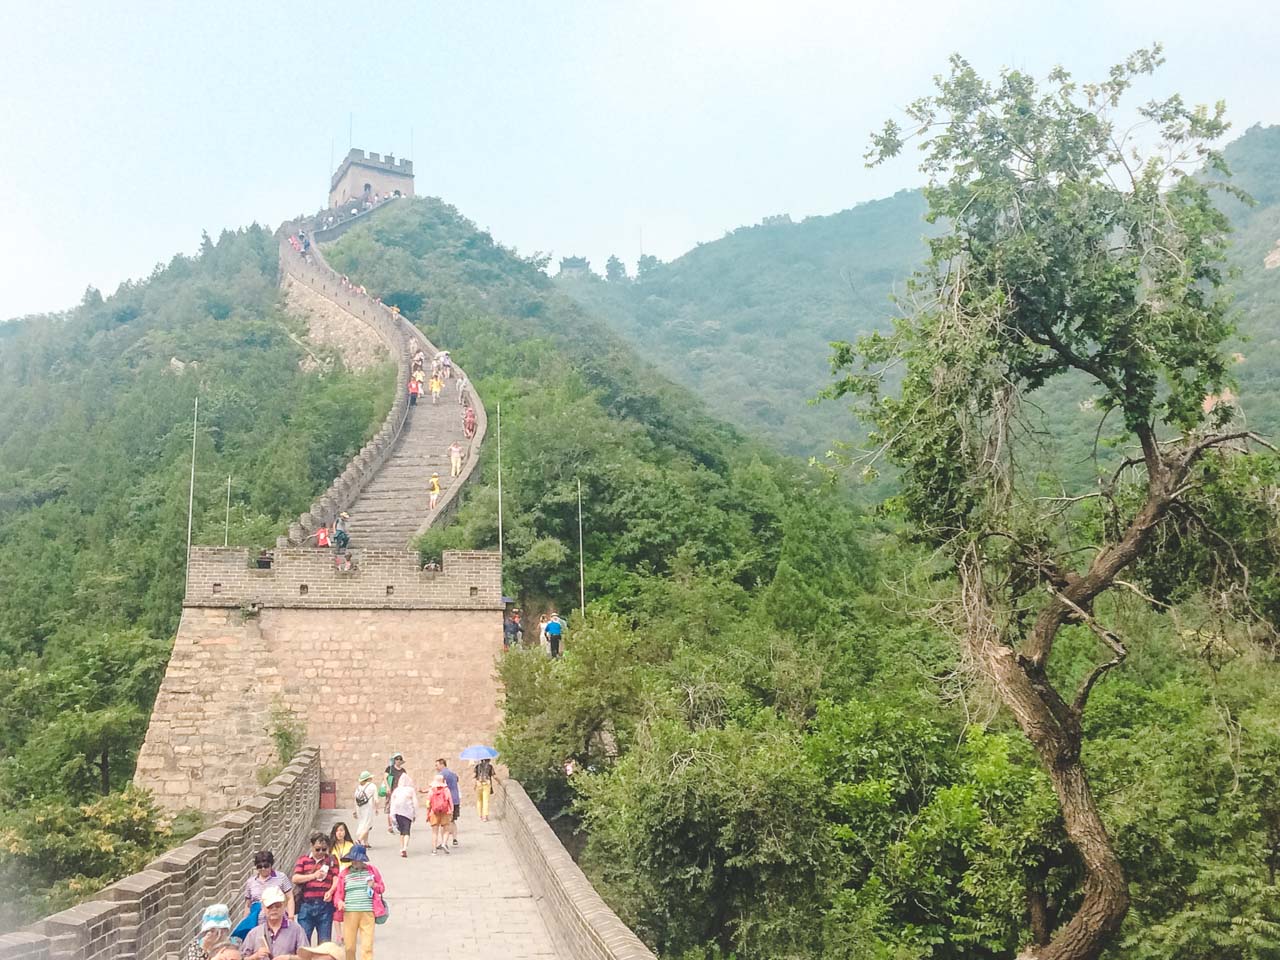 People walking along the Juyongguan section of the Great Wall of China